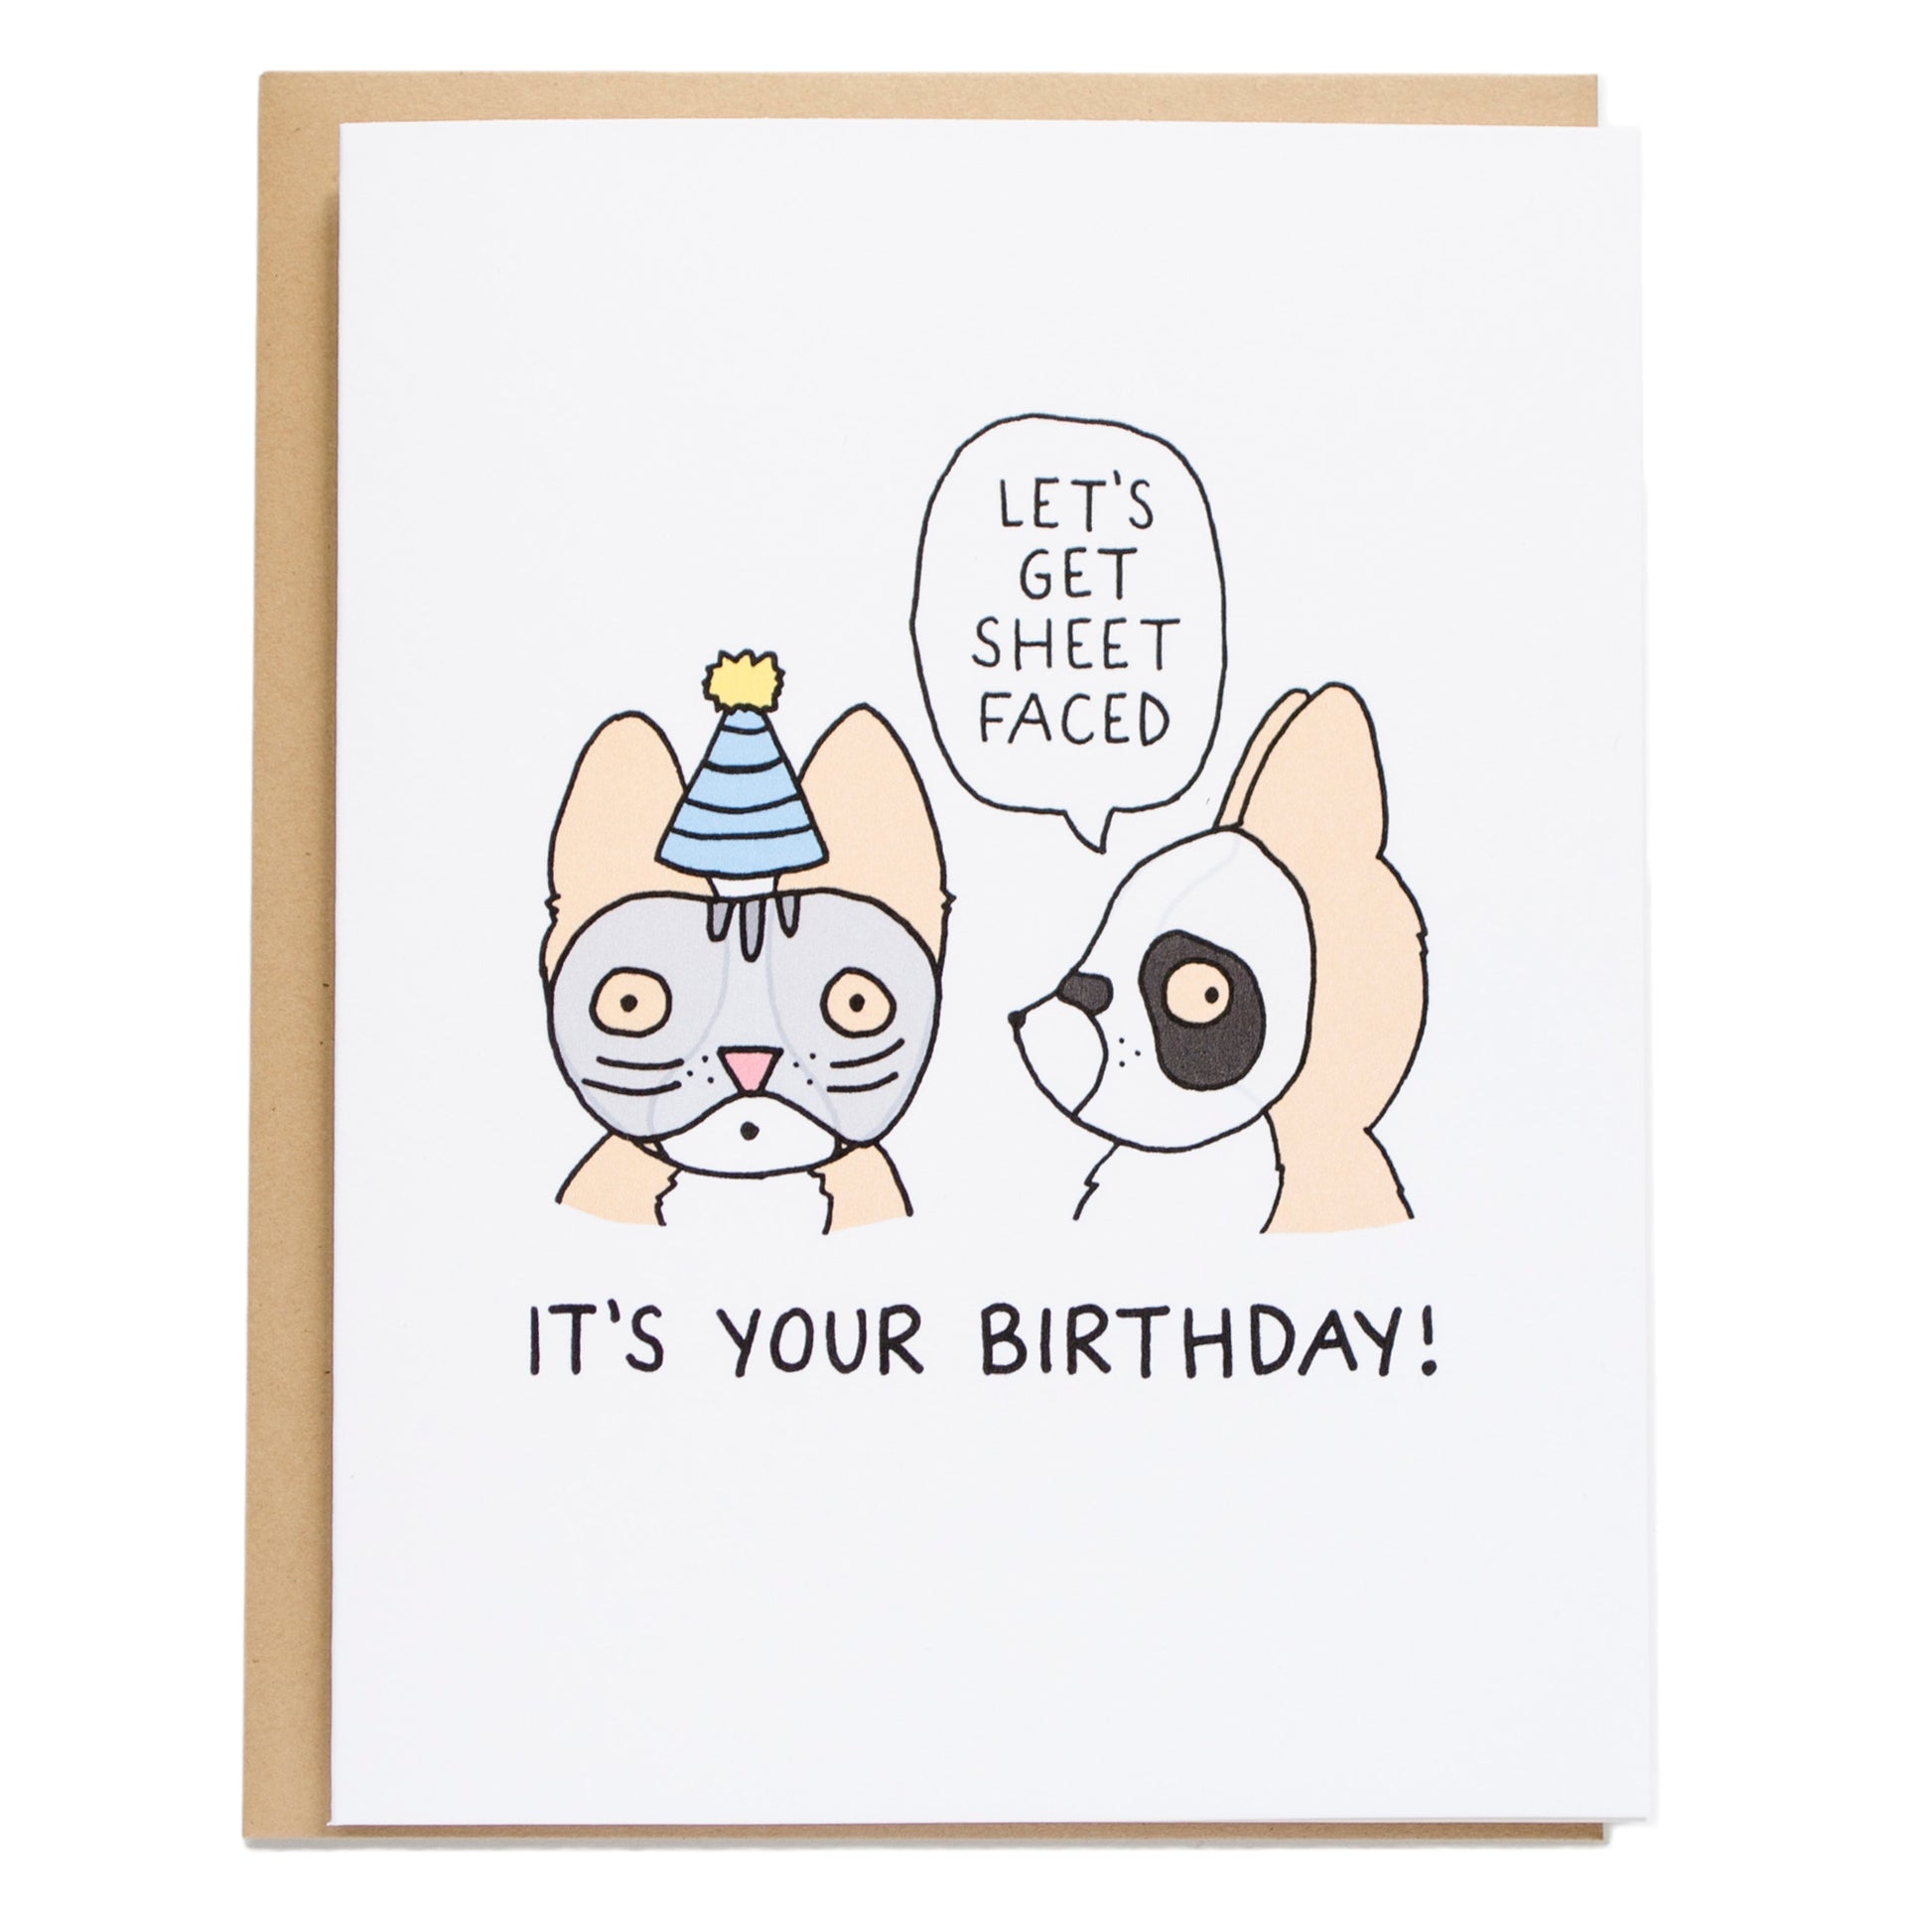 two corgis wearing sheet masks on that have funny cat and panda designs on them, one of them says, let's get sheet faced, and the bottom of the card reads, it's your birthday!